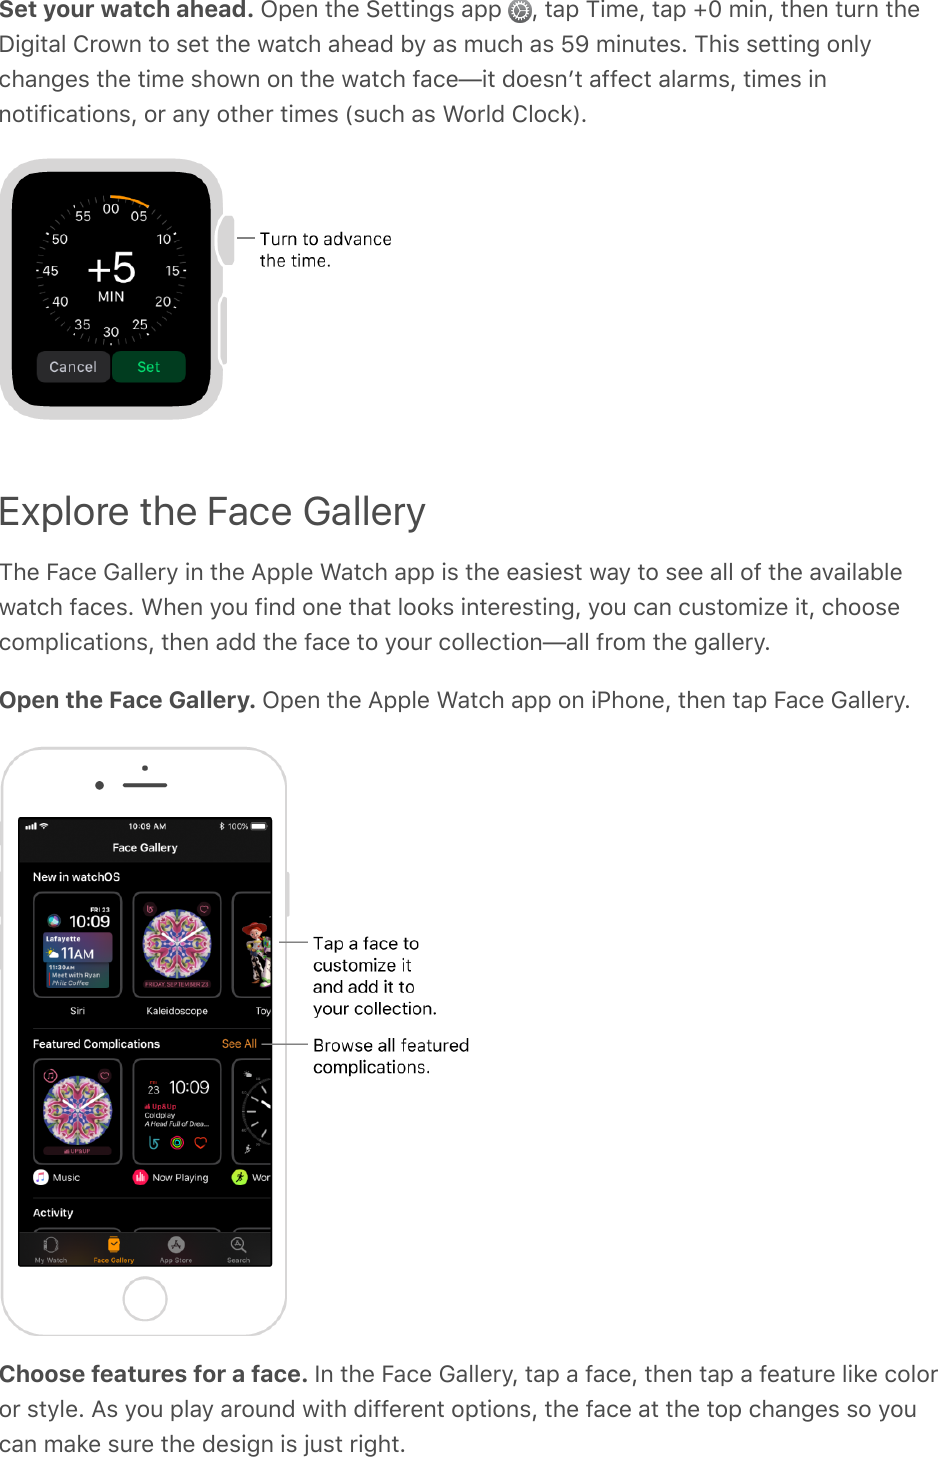 Set your watch ahead. Open the Settings app  , tap Time, tap +0 min, then turn theDigital Crown to set the watch ahead by as much as 59 minutes. This setting onlychanges the time shown on the watch face—it doesnʼt affect alarms, times innotifications, or any other times (such as World Clock).Explore the Face GalleryThe Face Gallery in the Apple Watch app is the easiest way to see all of the availablewatch faces. When you find one that looks interesting, you can customize it, choosecomplications, then add the face to your collection—all from the gallery.Open the Face Gallery. Open the Apple Watch app on iPhone, then tap Face Gallery.Choose features for a face. In the Face Gallery, tap a face, then tap a feature like coloror style. As you play around with different options, the face at the top changes so youcan make sure the design is just right.